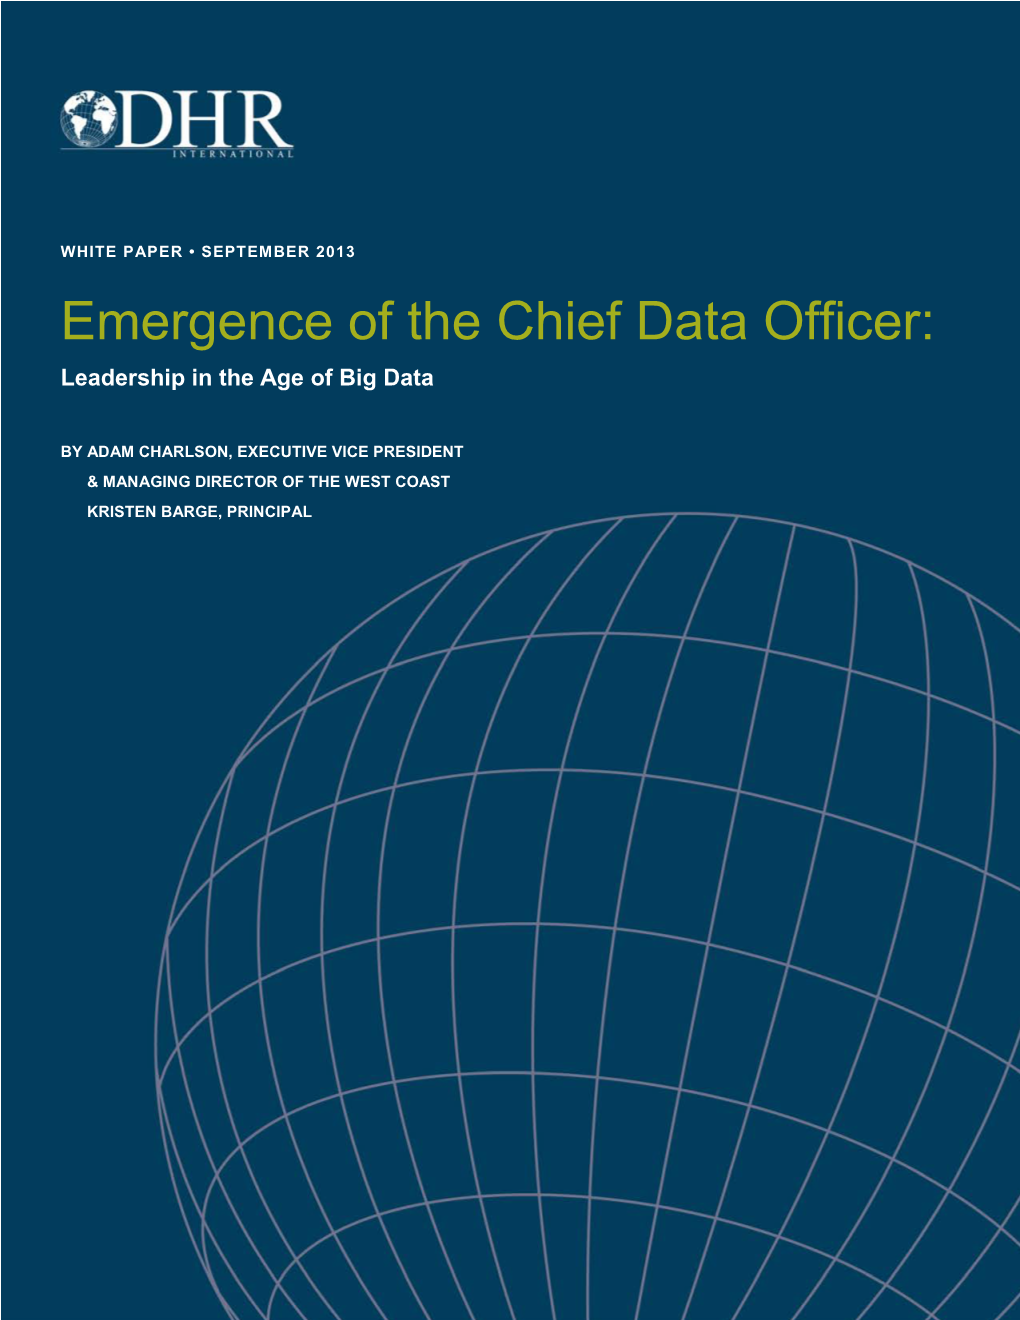 Emergence of the Chief Data Officer: Leadership in the Age of Big Data